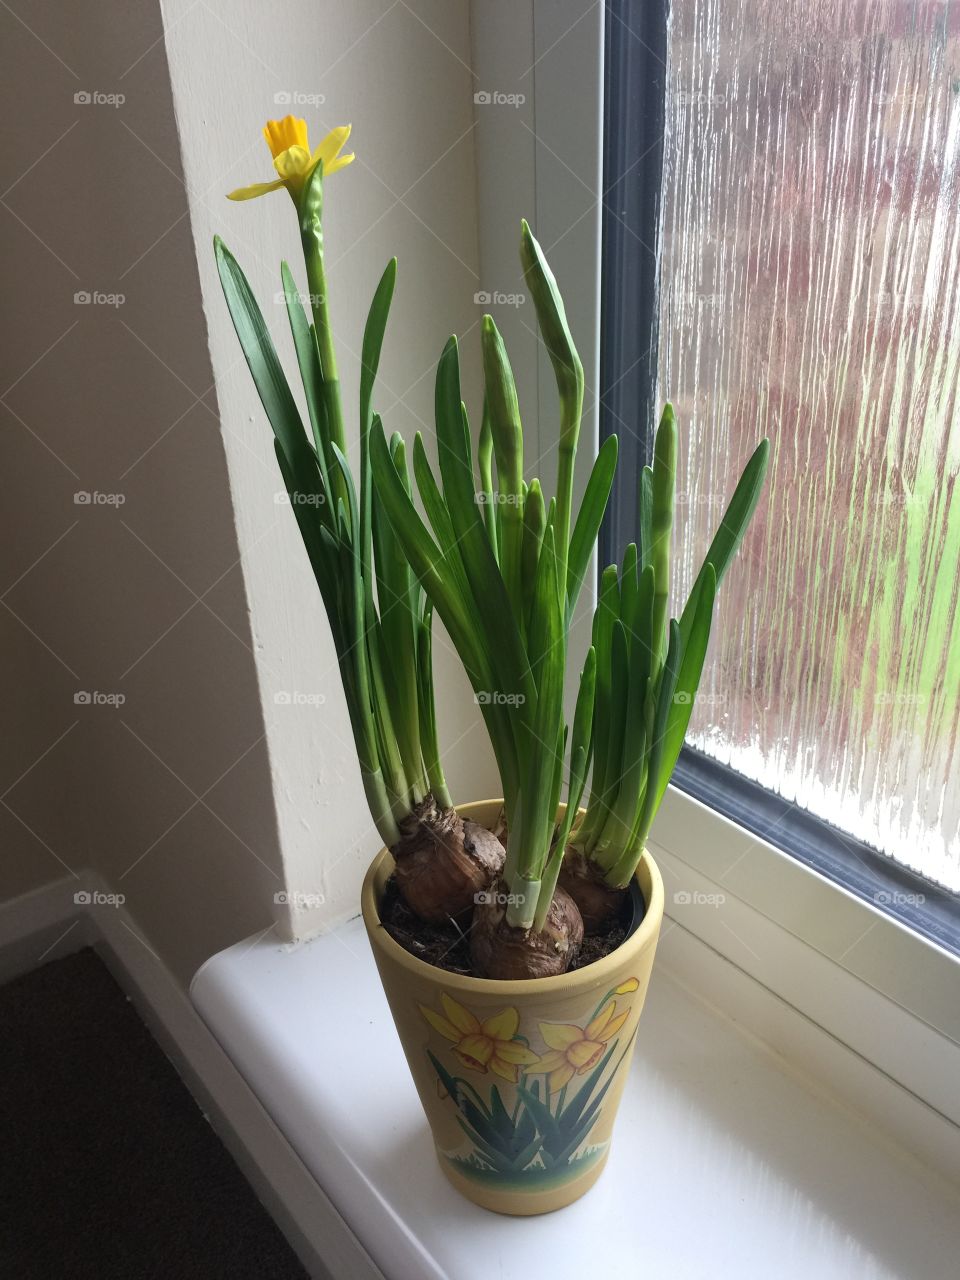 Daffodils by the window